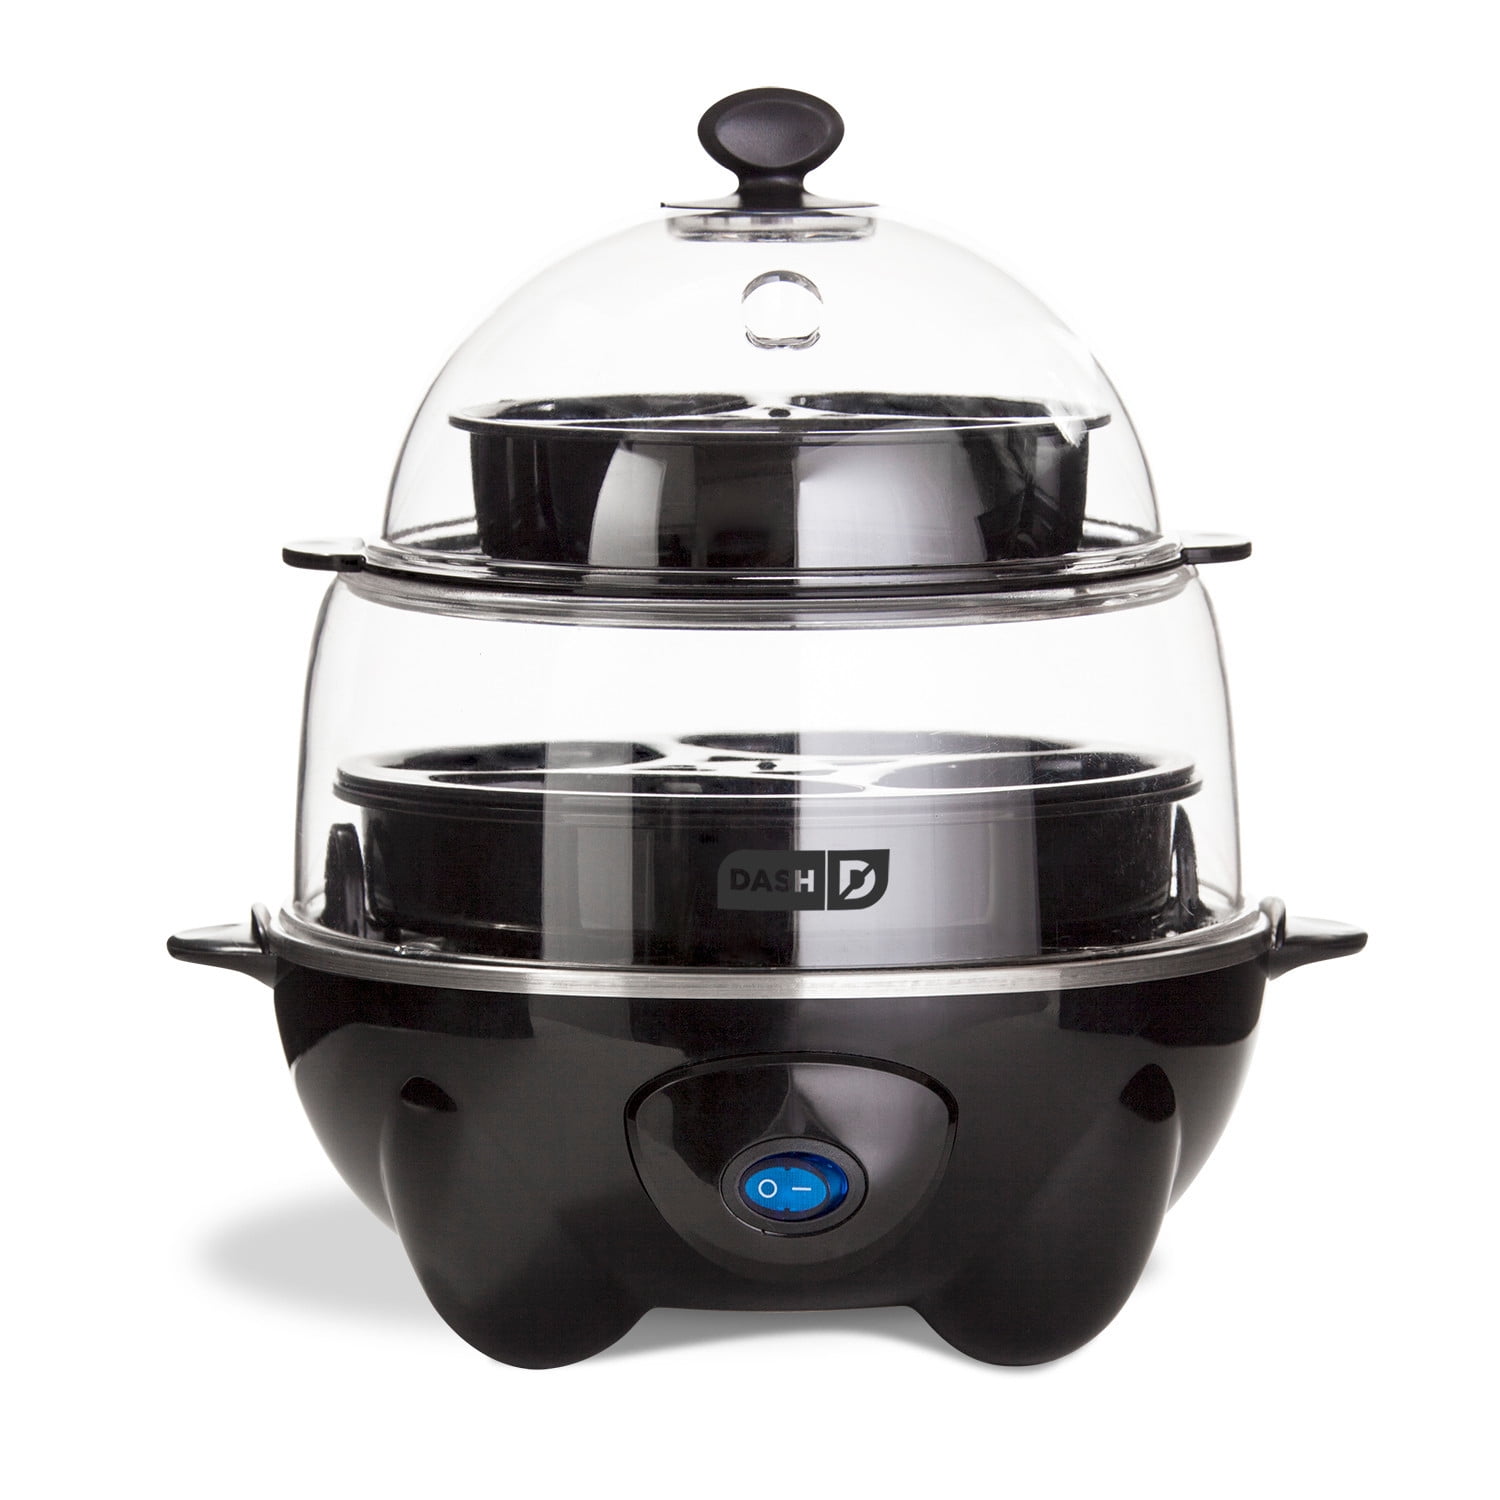 Dash DEC012BK Deluxe Rapid Egg Cooker Electric for for Hard Boiled,  Poached, Scrambled, Omelets, Steamed Vegetables, Seafood, Dumplings & More  12 Capacity, with Auto Shut Off Feature Black - Taste Topics